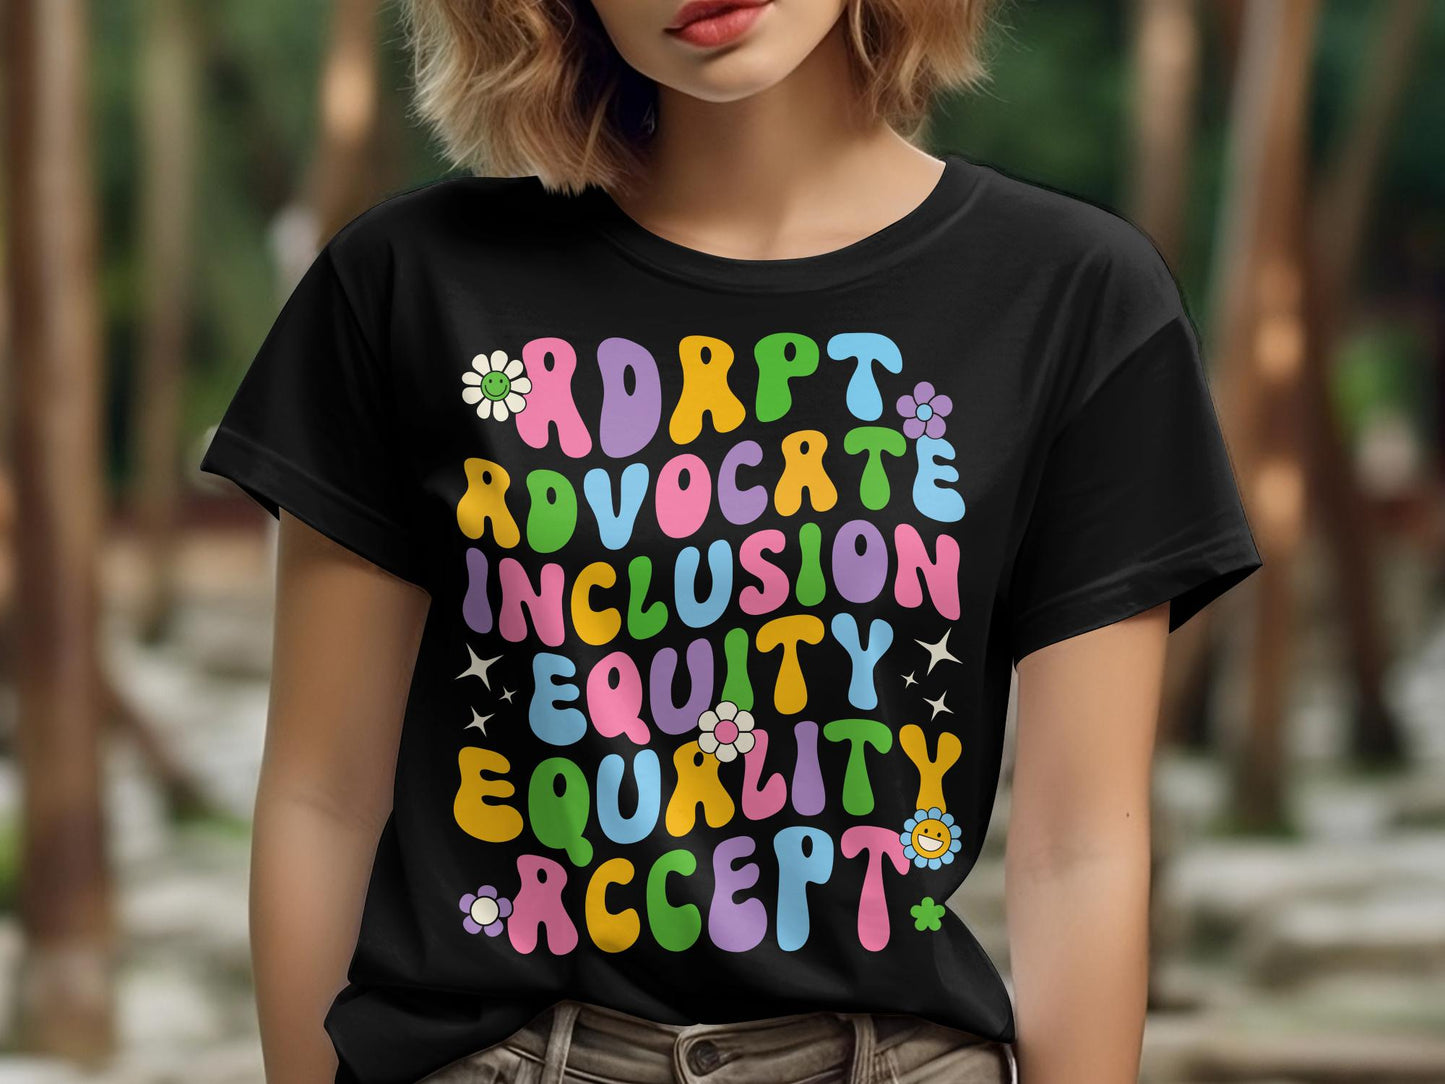 Adapt-Advocate-Inclusion-Equity-Equality-Accept